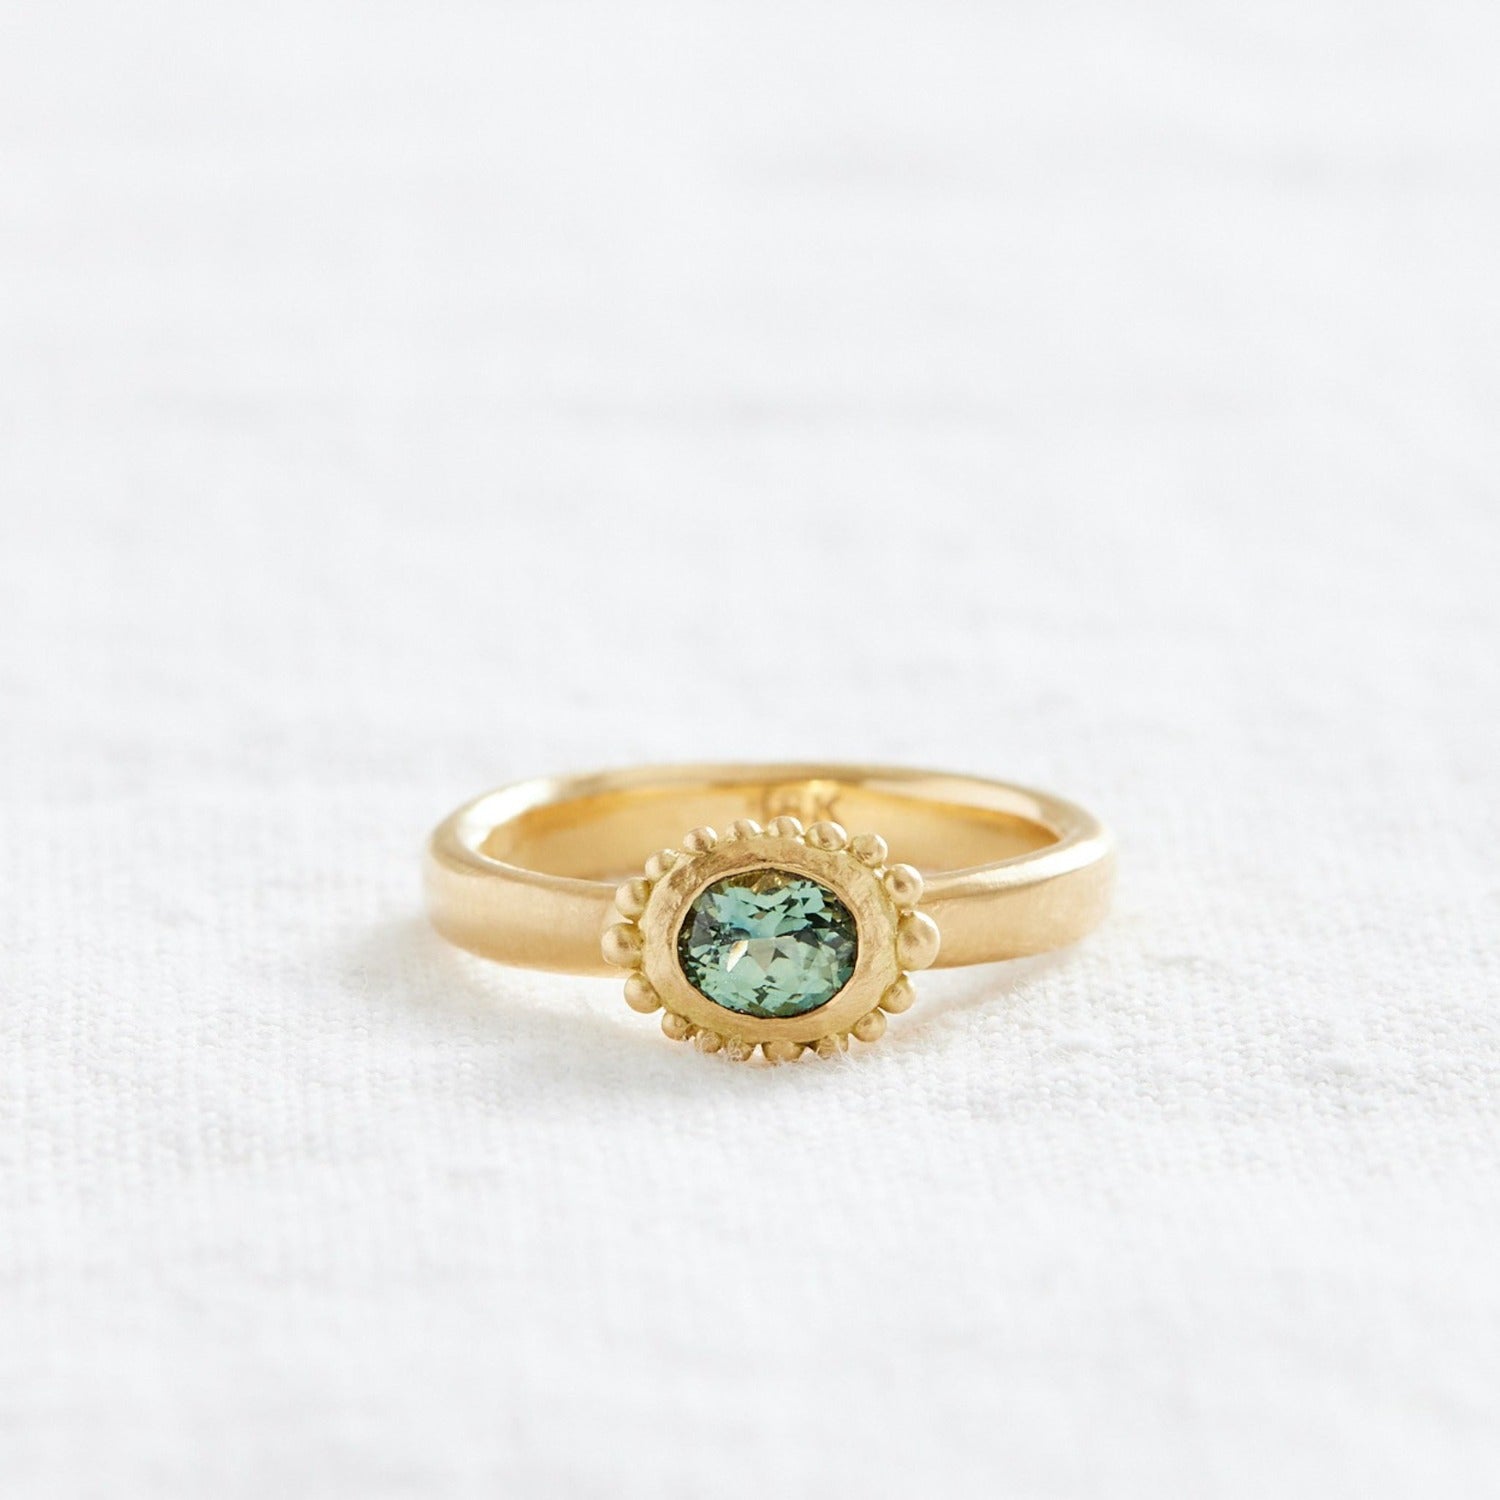 Gold ring with oval teal stone an granulations all around it